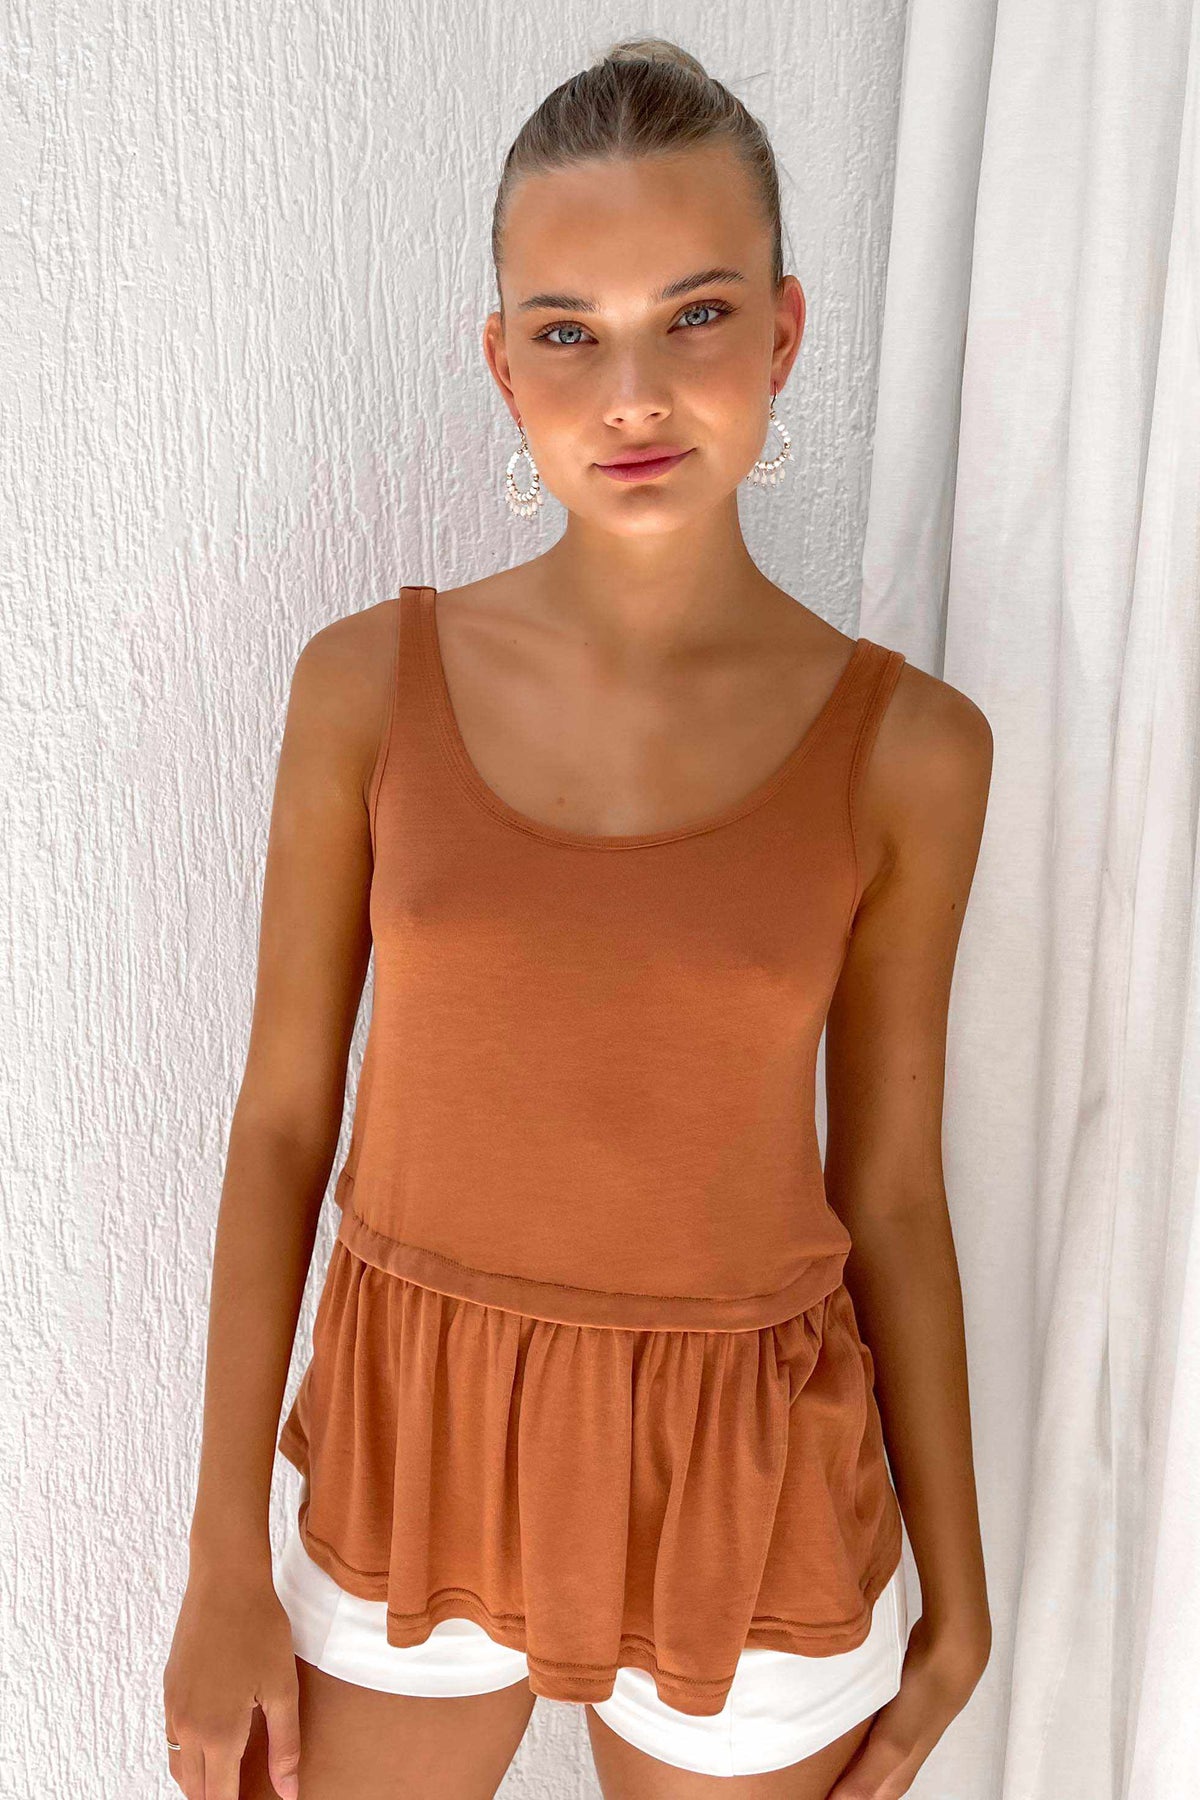 Glam Top, BASIC TOPS, new arrivals, ORANGE, POLYESTER &amp; RAYON &amp; SPANDEX, POLYESTER AND RAYON AND SPANDEX, SALE, TOP, TOPS, Our New Glam Top Is Now Only $51.00 Exclusive At Mishkah, Our New Glam Top is now only $51.00-We Have The Latest Women&#39;s Tops @ Mishkah Online Fashion Boutique-MISHKAH